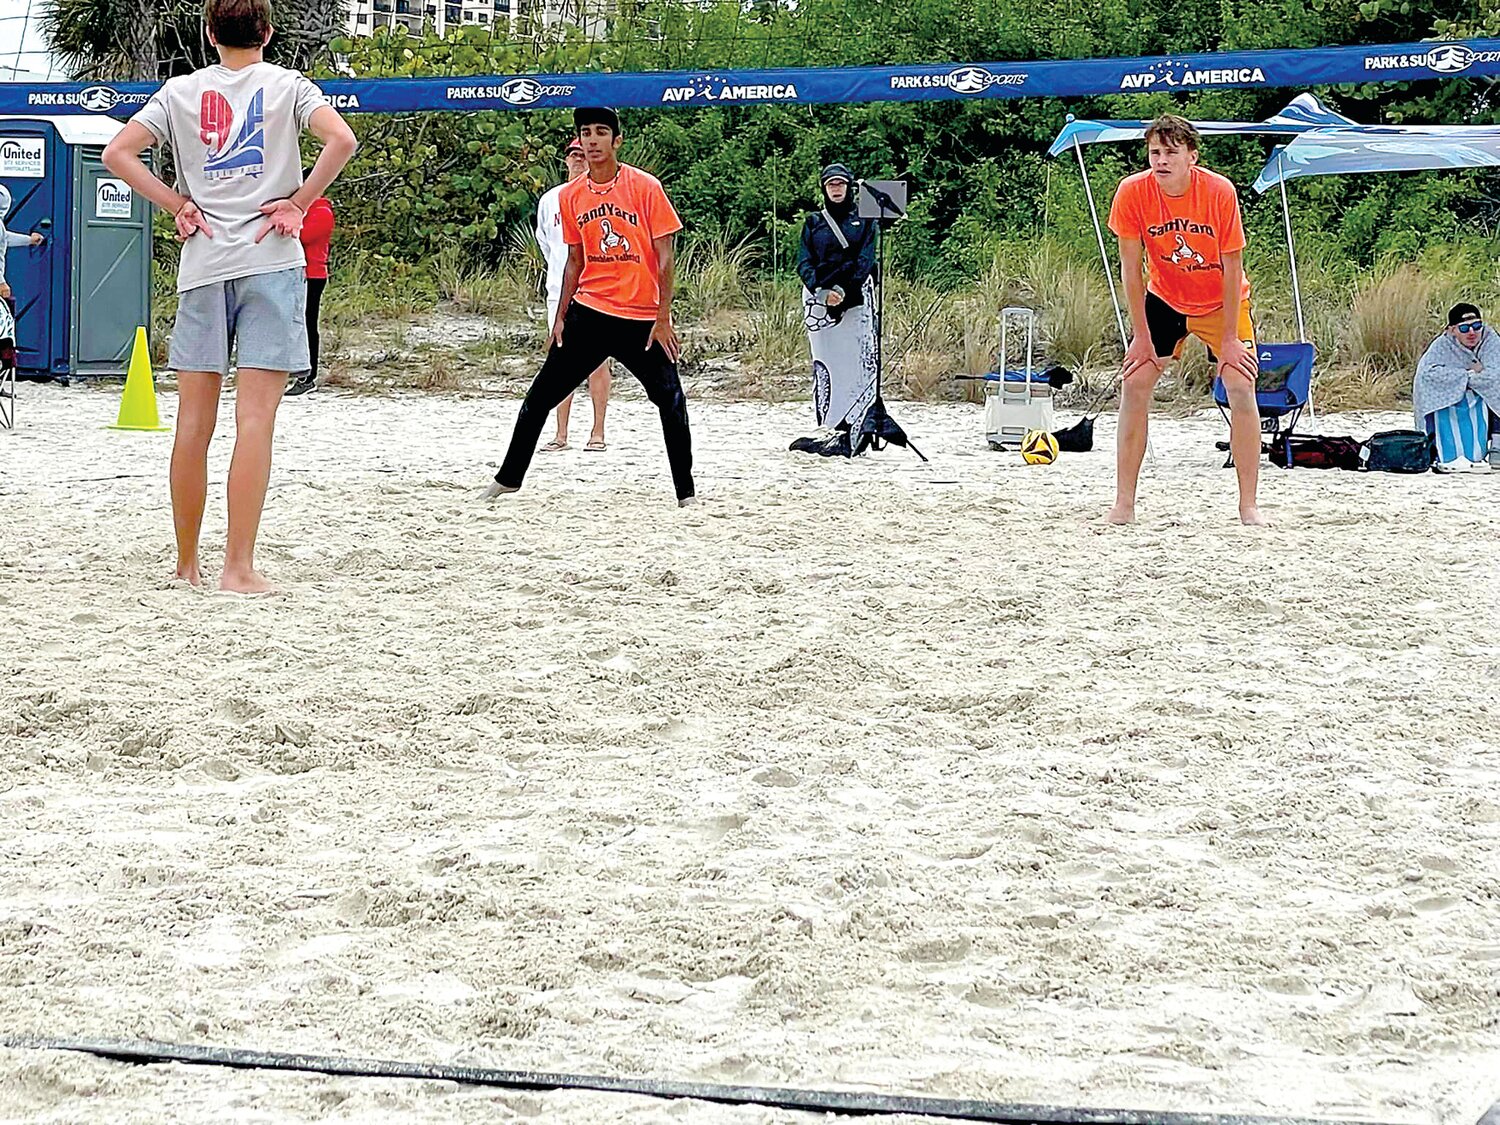 J.F. Byrnes High School student Jacobi Johansen and Council Rock South High School student Joshua Cook competed as a 16U team in the AVP East Coast Championships.